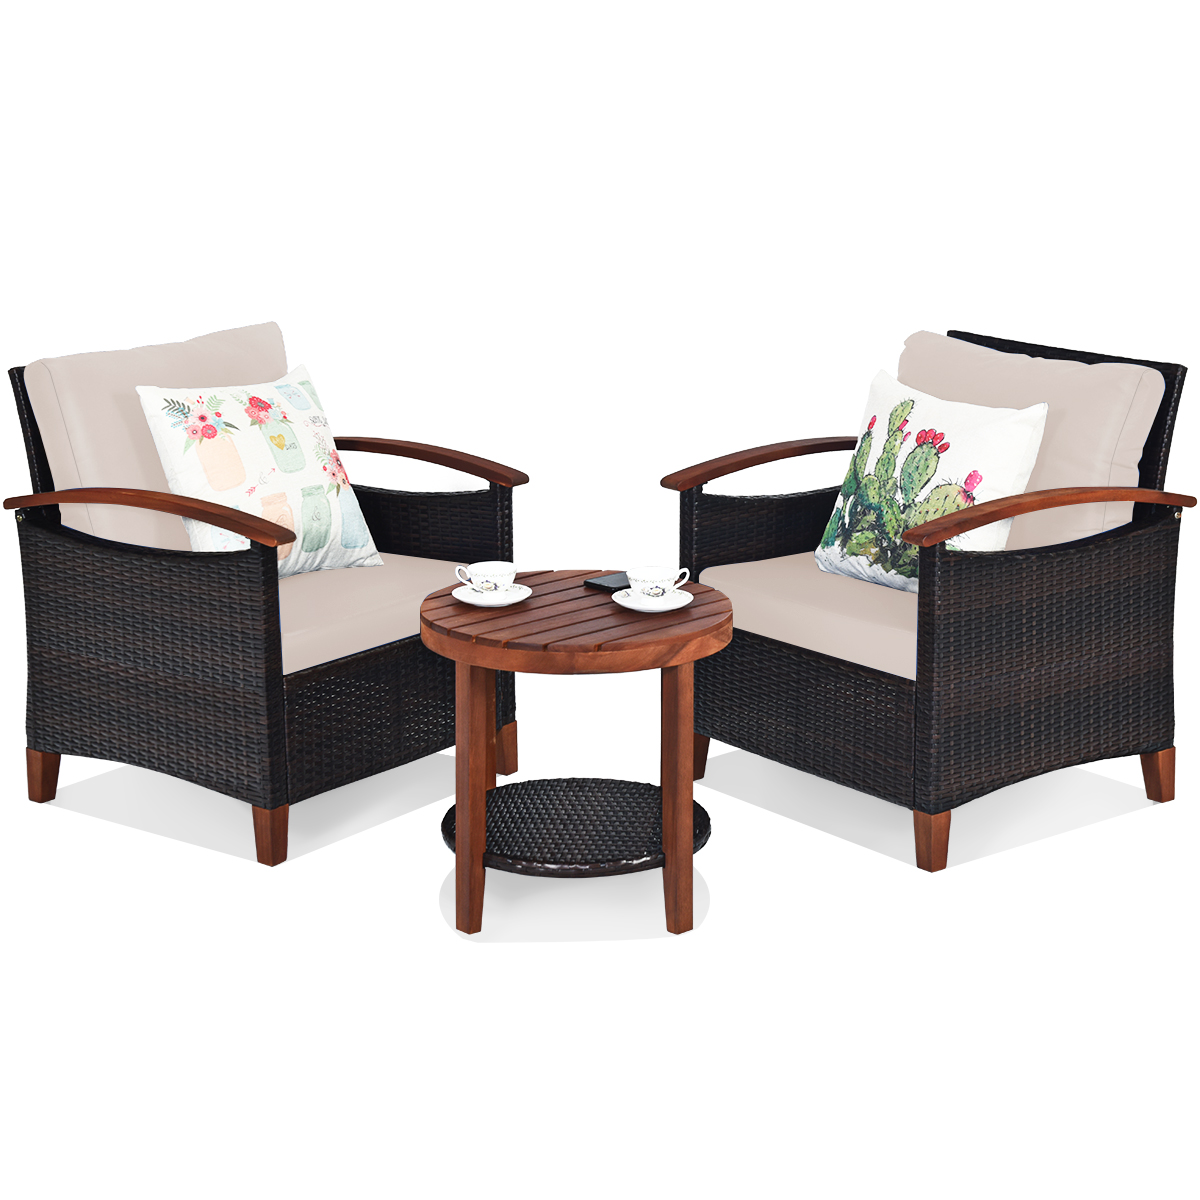 Patiojoy 3-Piece Patio Rattan Bistro Set Acacia Wood Frame Sofa and Side Table Beige - image 5 of 6